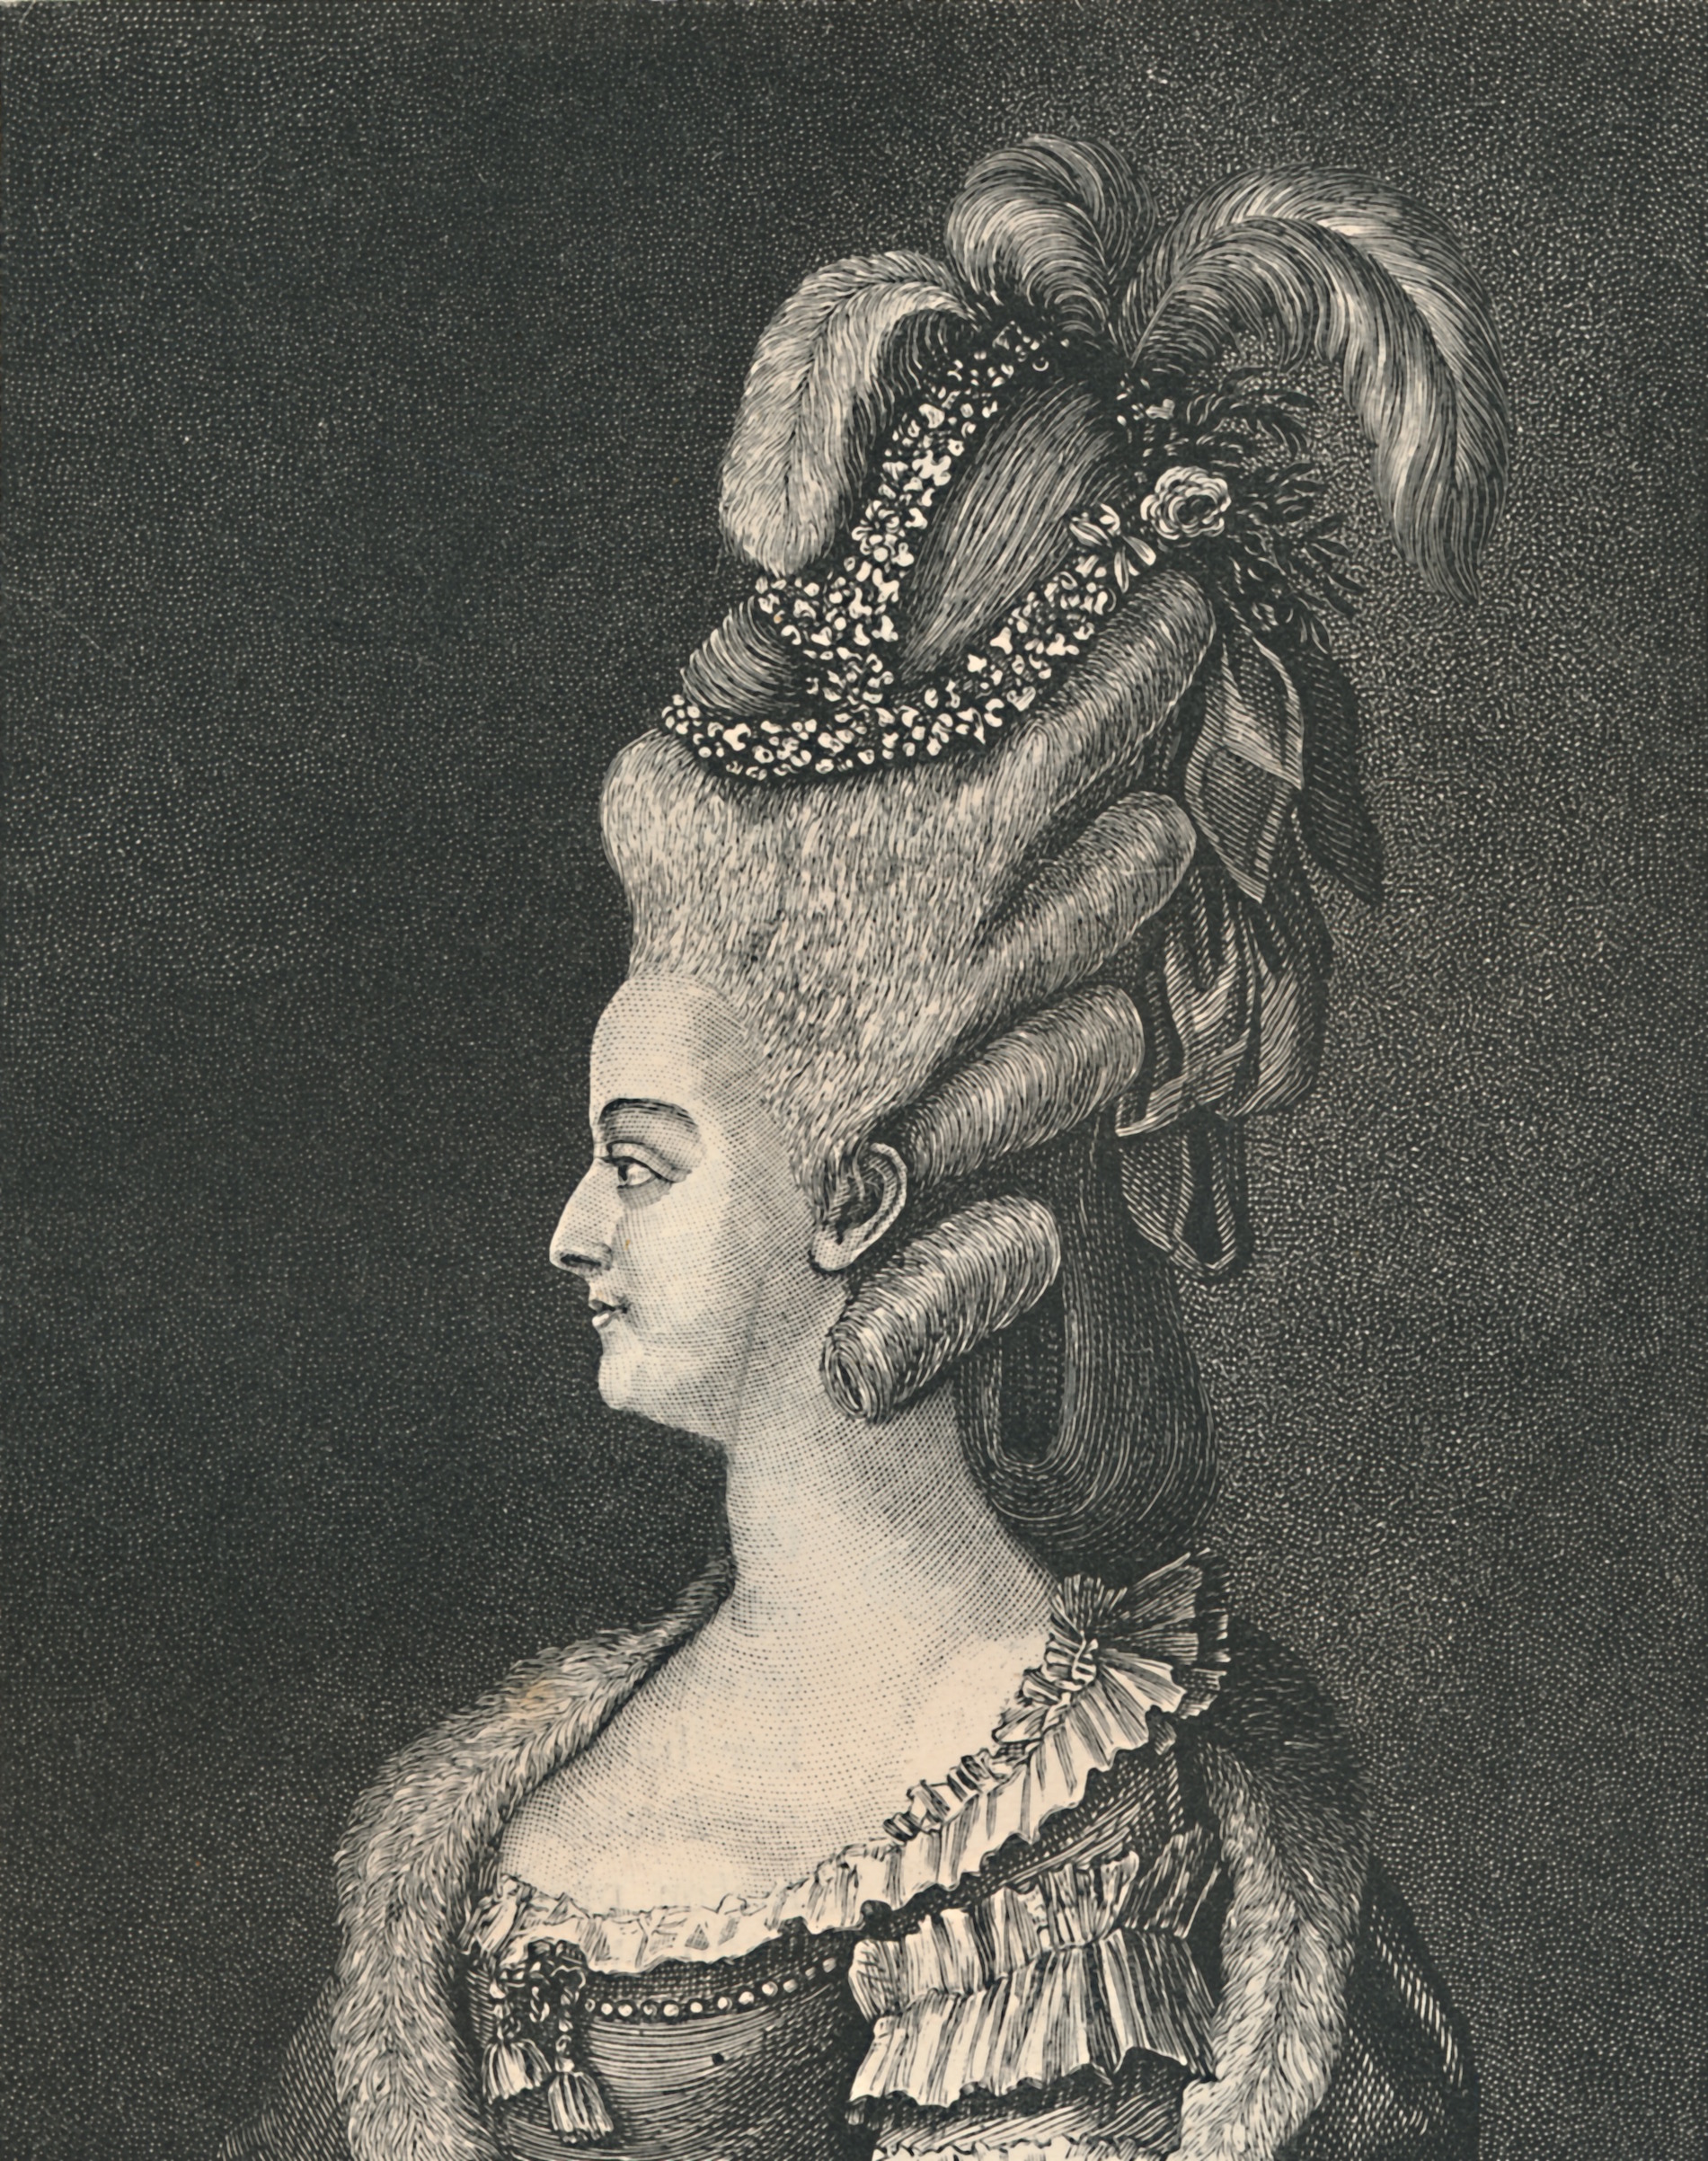 19th century illustration of Marie Antoinette (1755-1793) with elaborate hairstyle. (Getty Images)